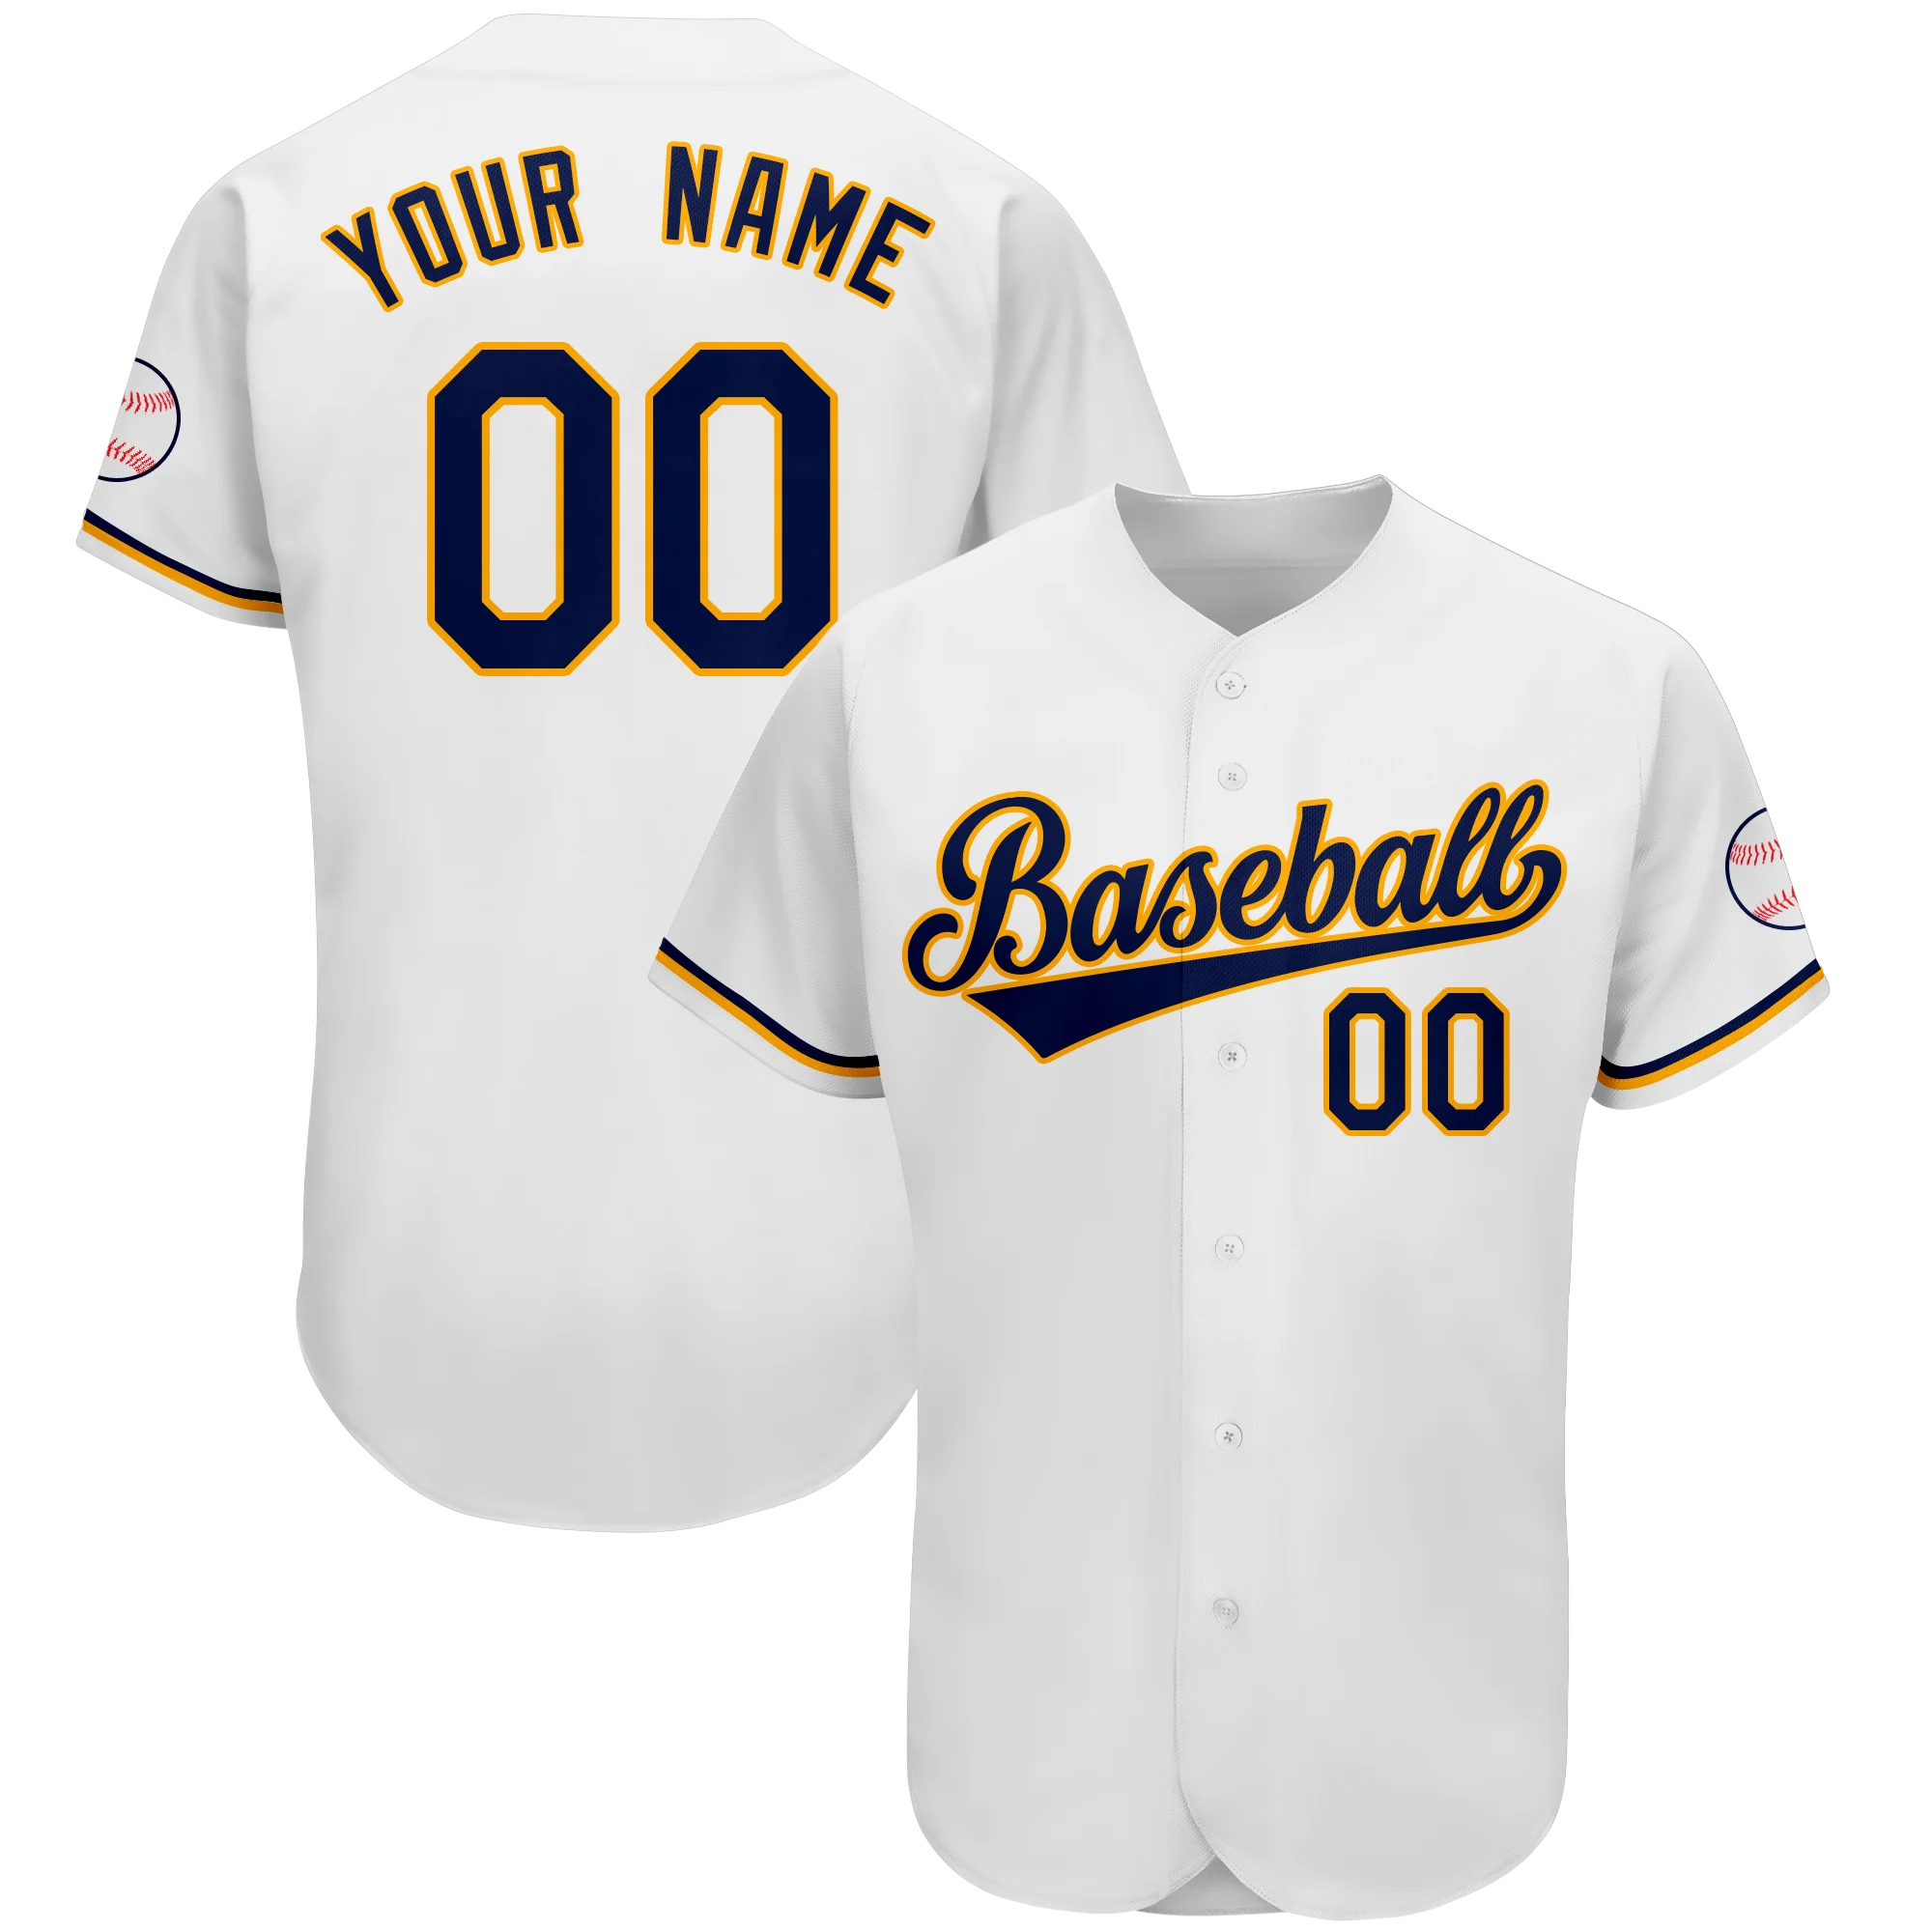 

Custom Baseball Jersey for Discount，Online New Arrival Printed Shirts Designed，Full Sublimated Men/Women/Youth Sport Jersey